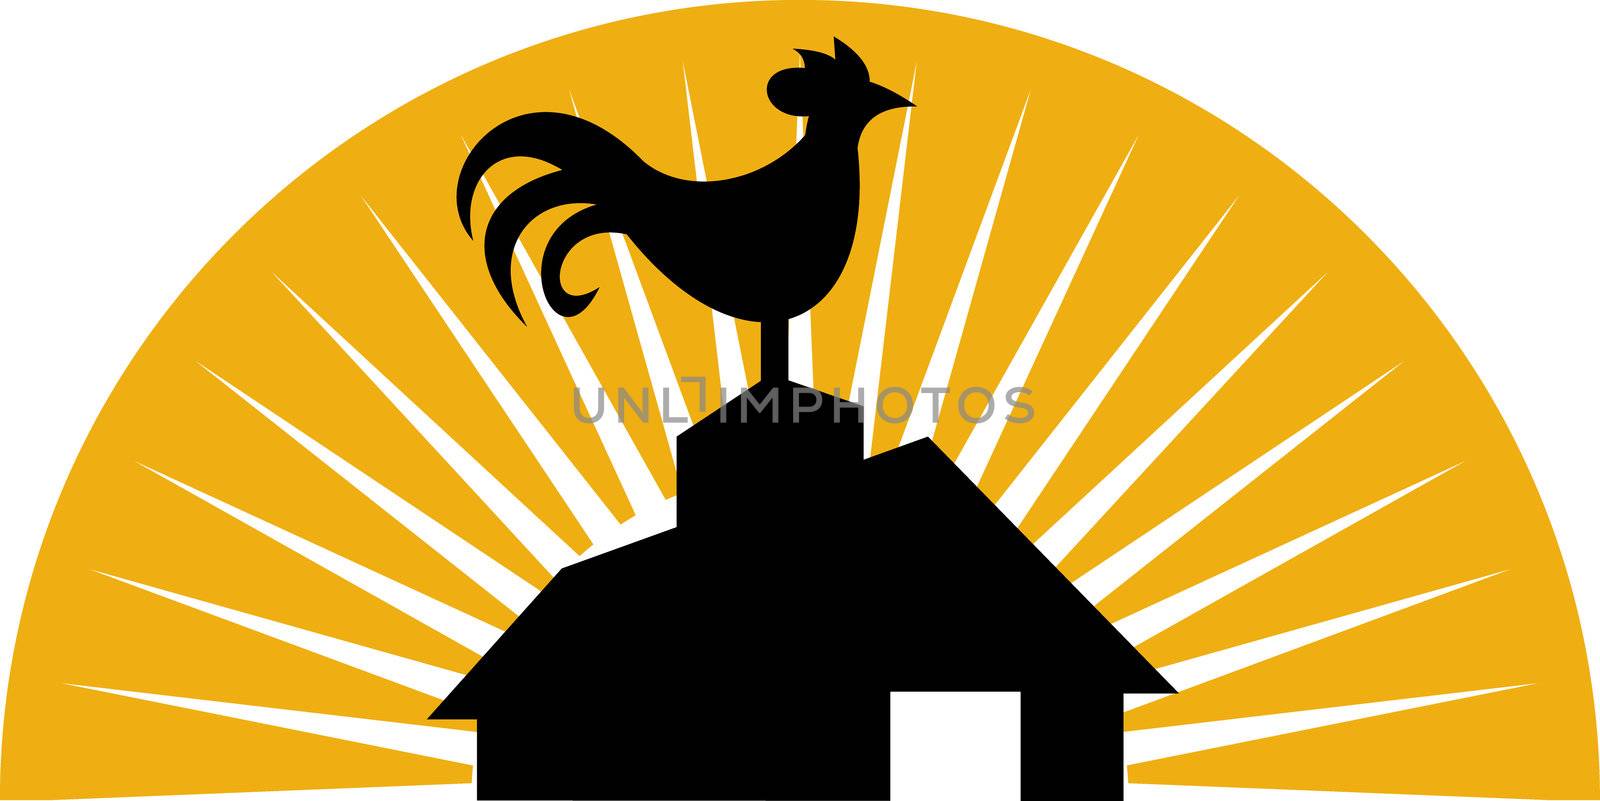 Rooster crowing on top of farm house or barn by patrimonio